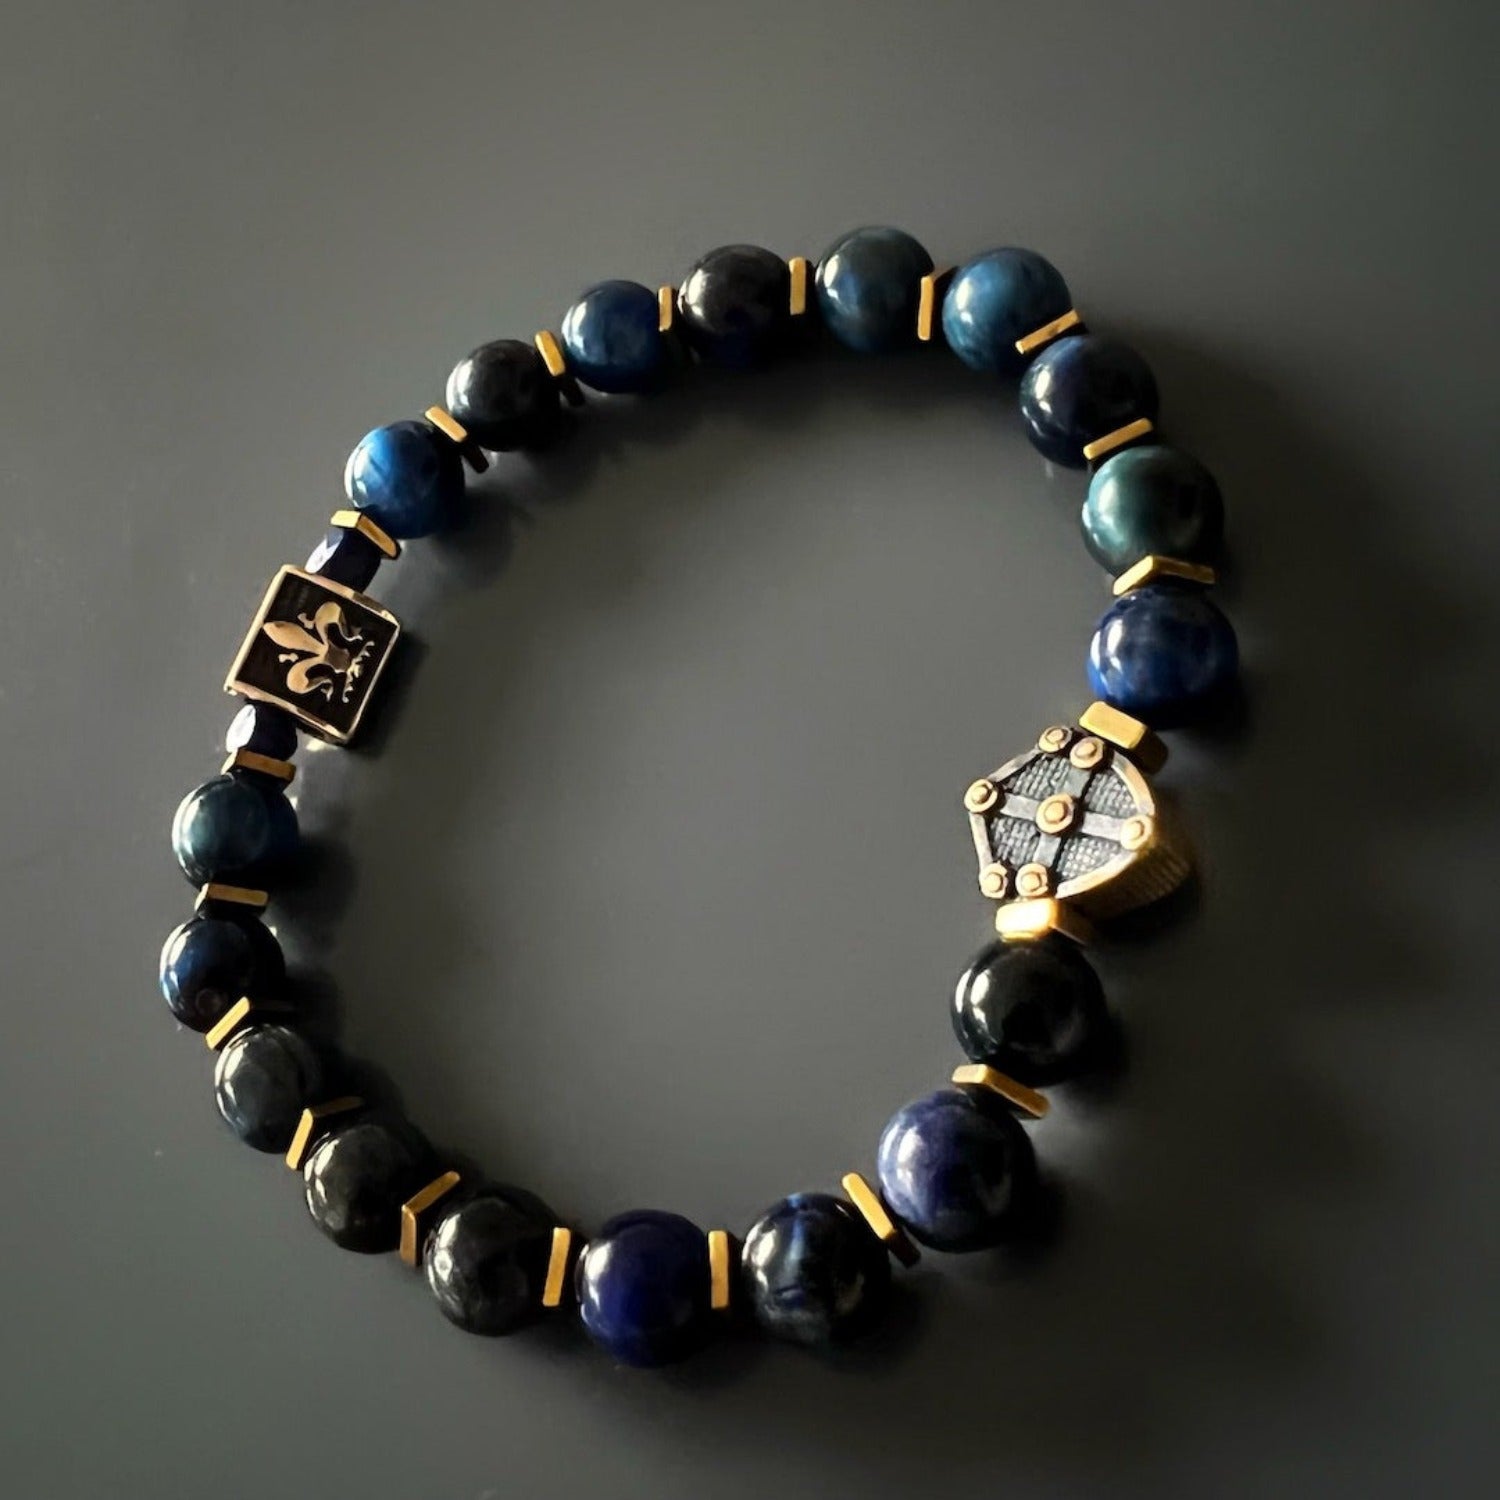 Courage and Confidence - Blue Tiger Eye Stones.